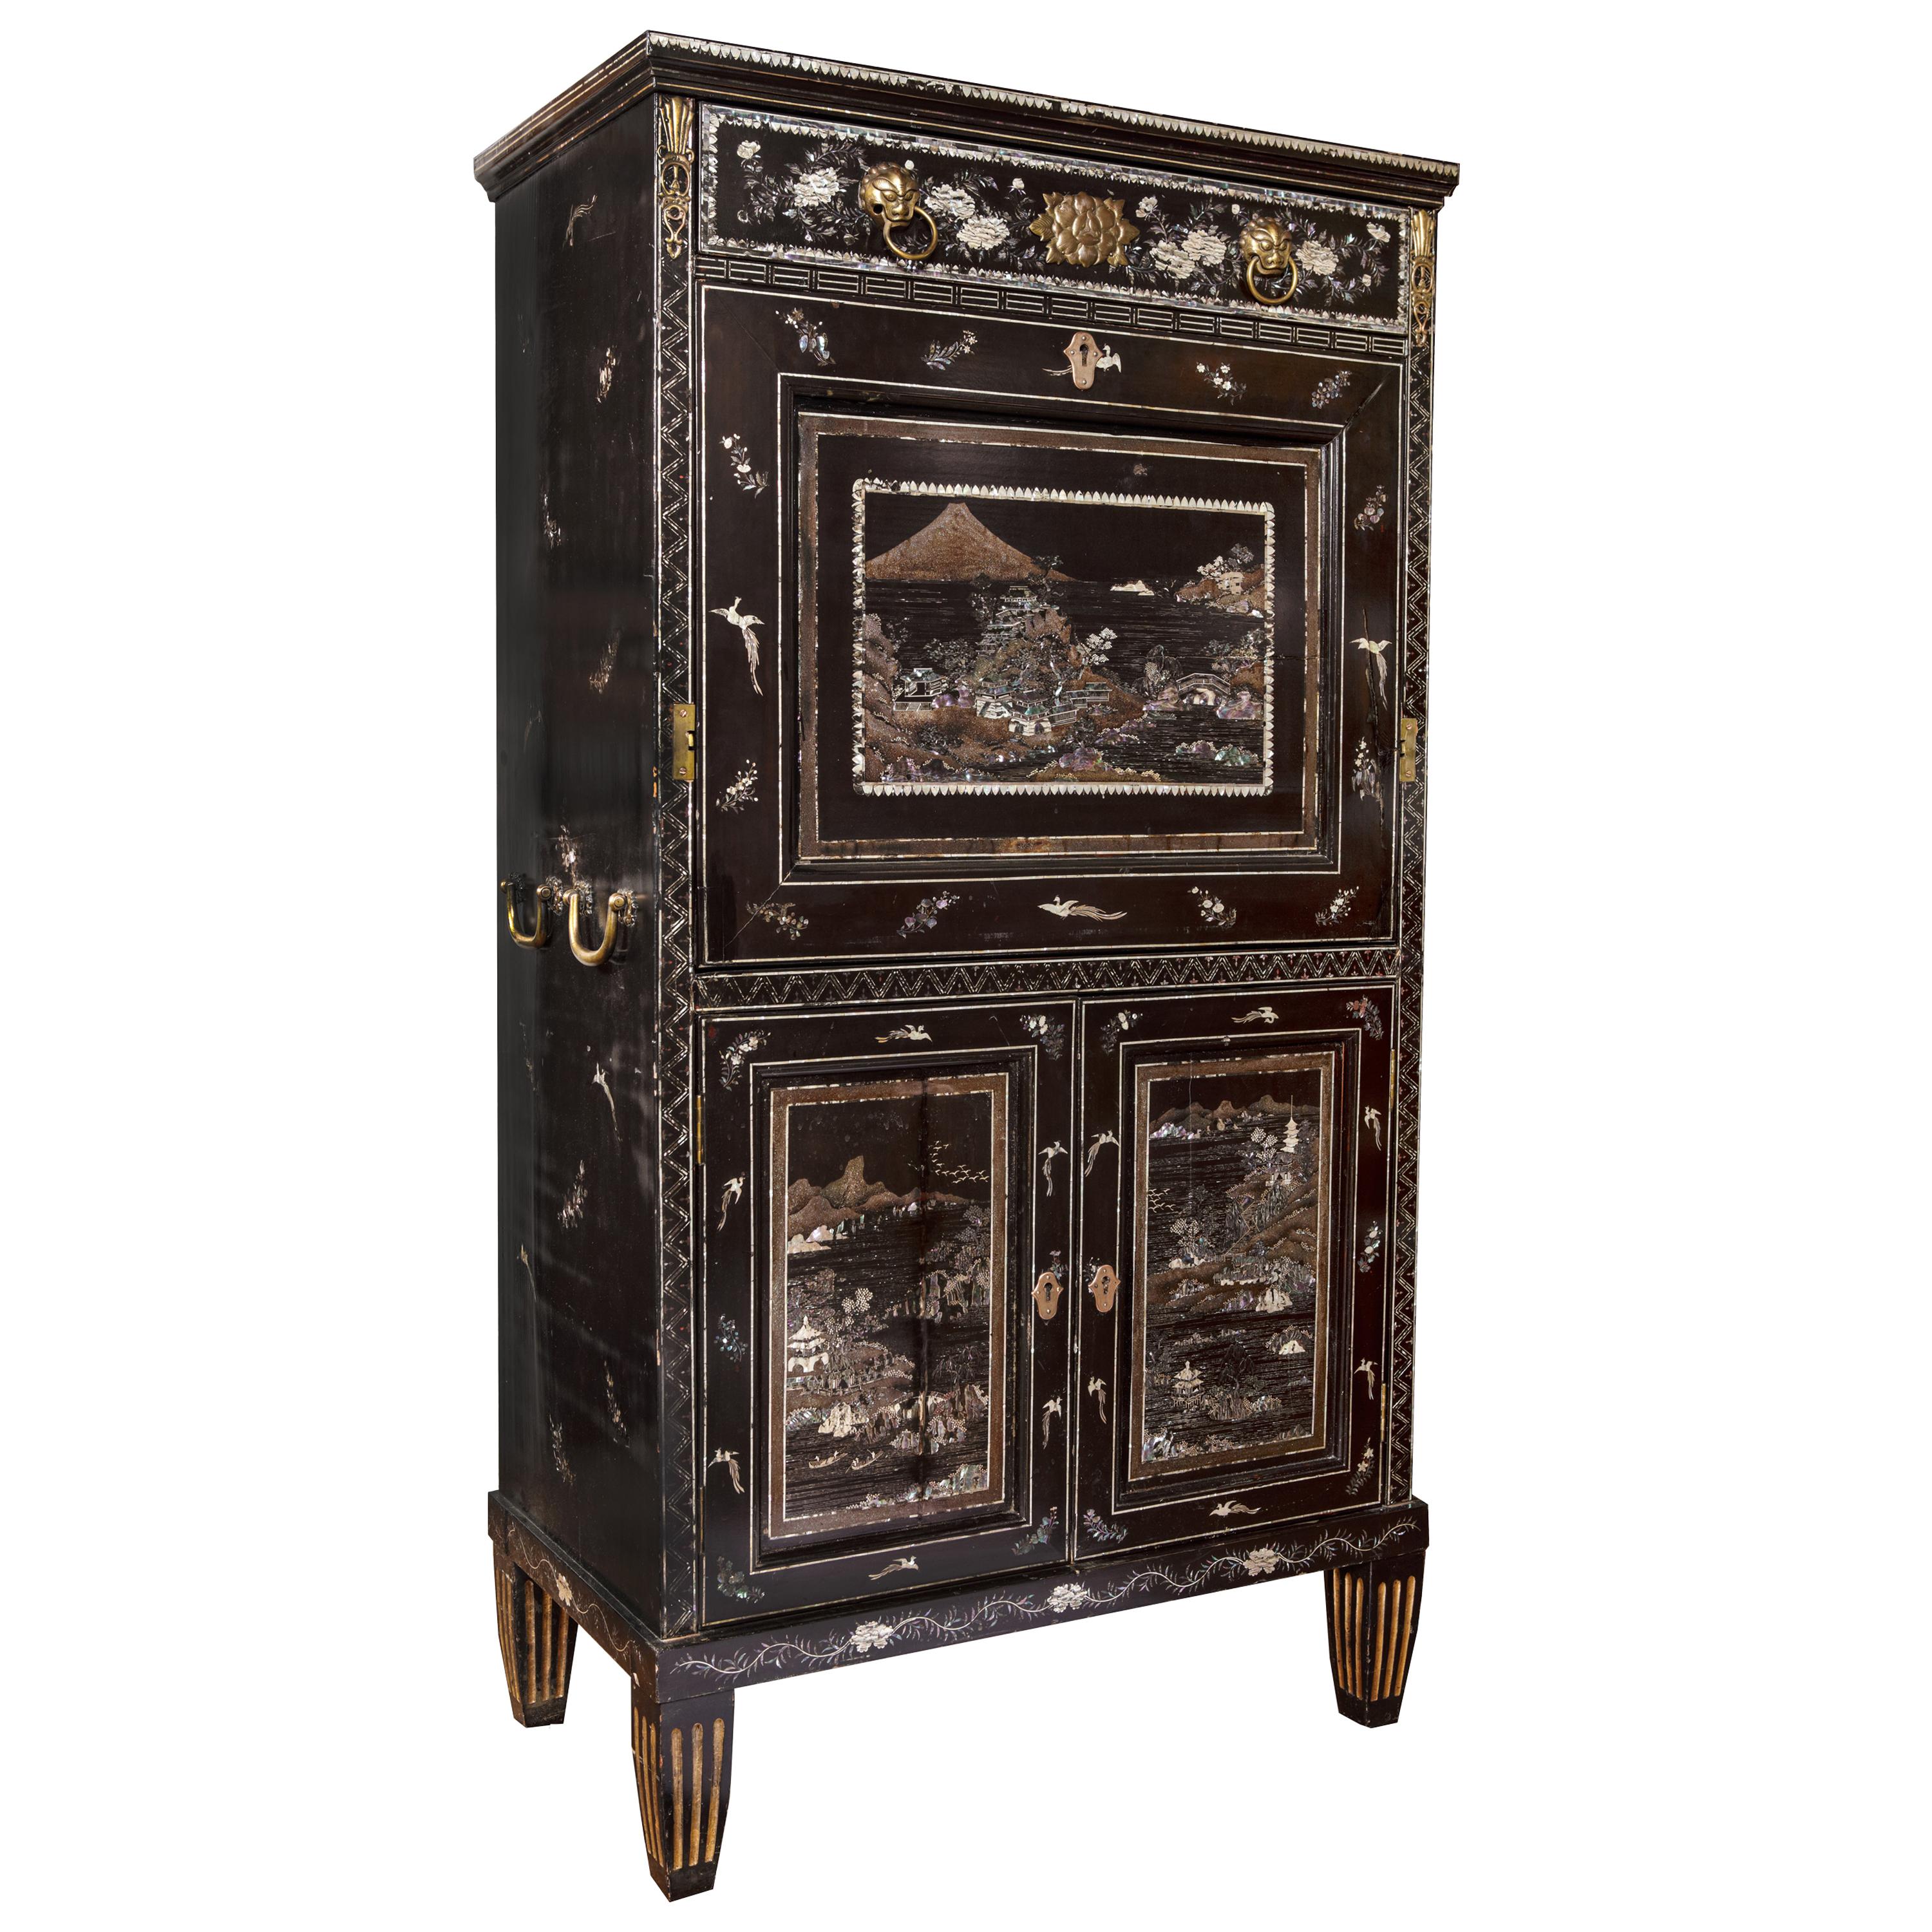 Japanese Export Lacquer Mother-of-Pearl Secretaire for the American Market